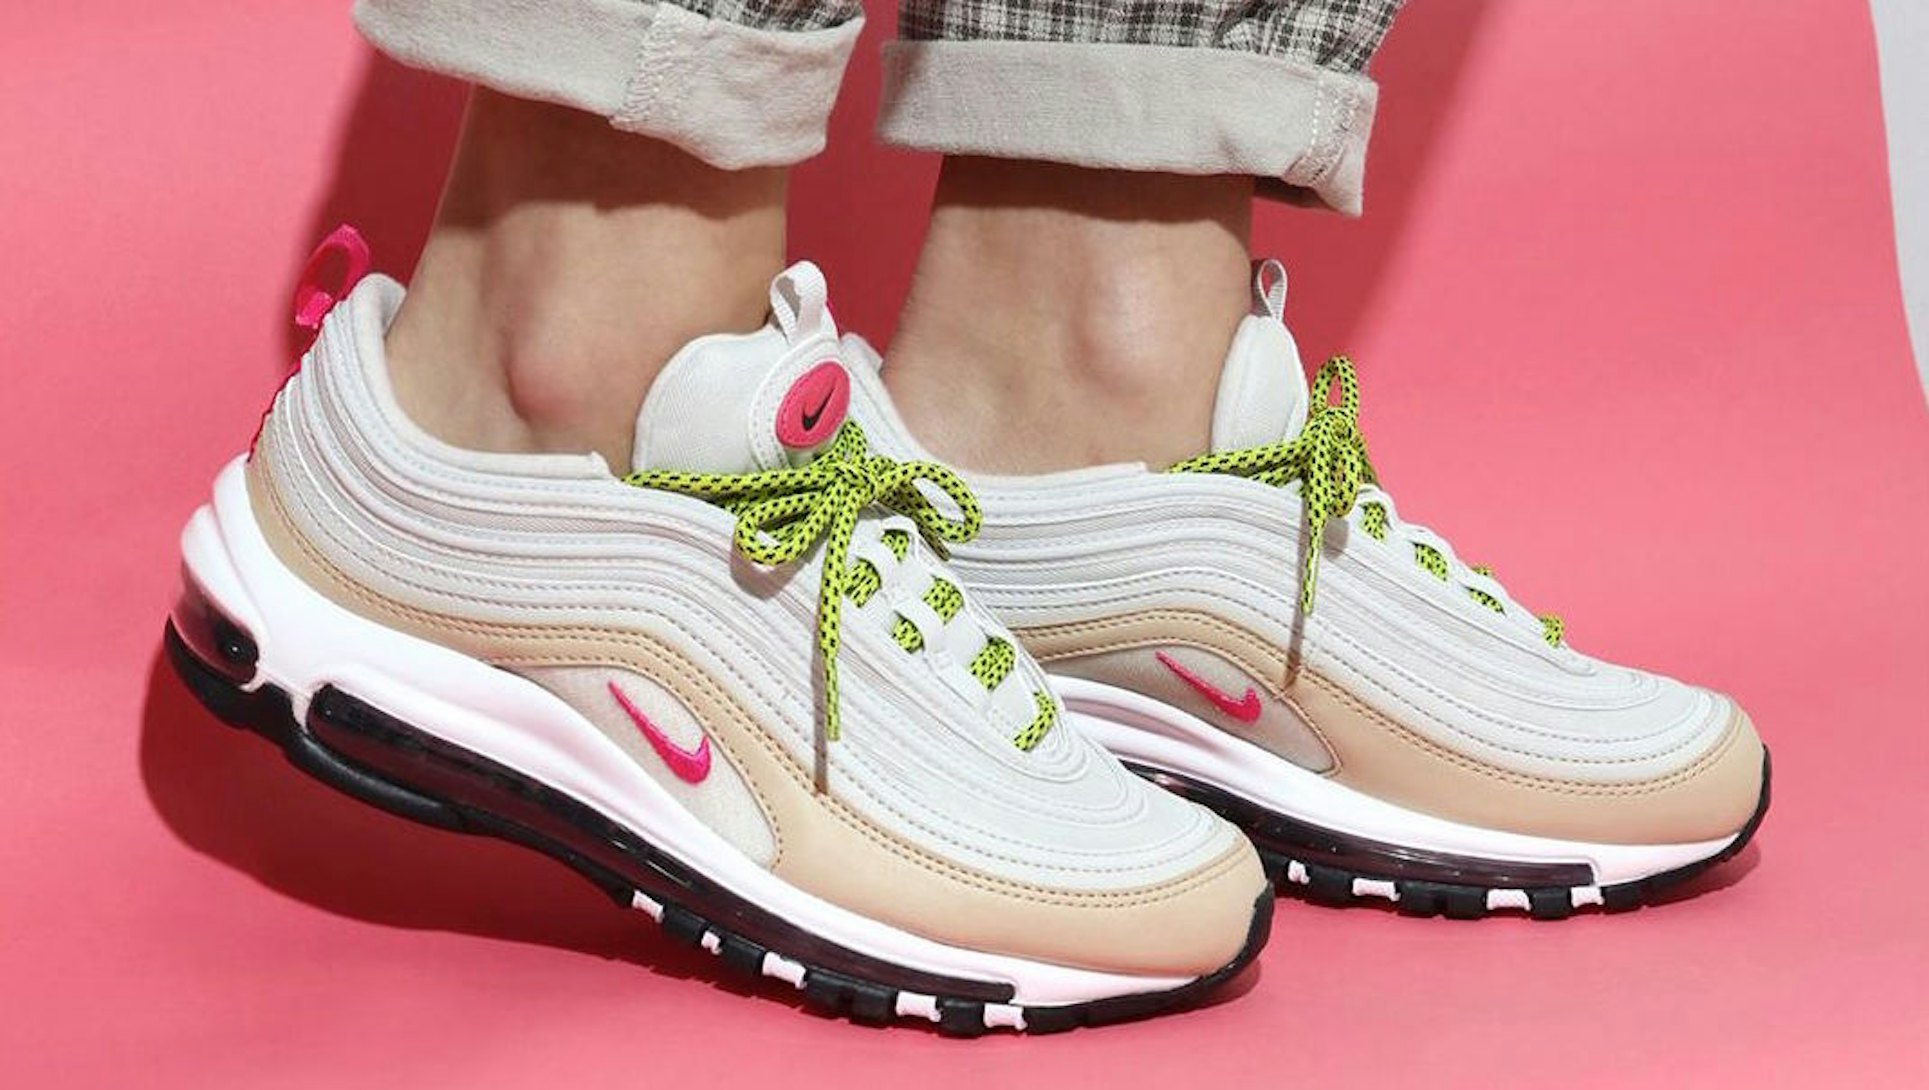 Sinis Bot ondergronds How Women Made The Nike Air Max 97 Popular Again